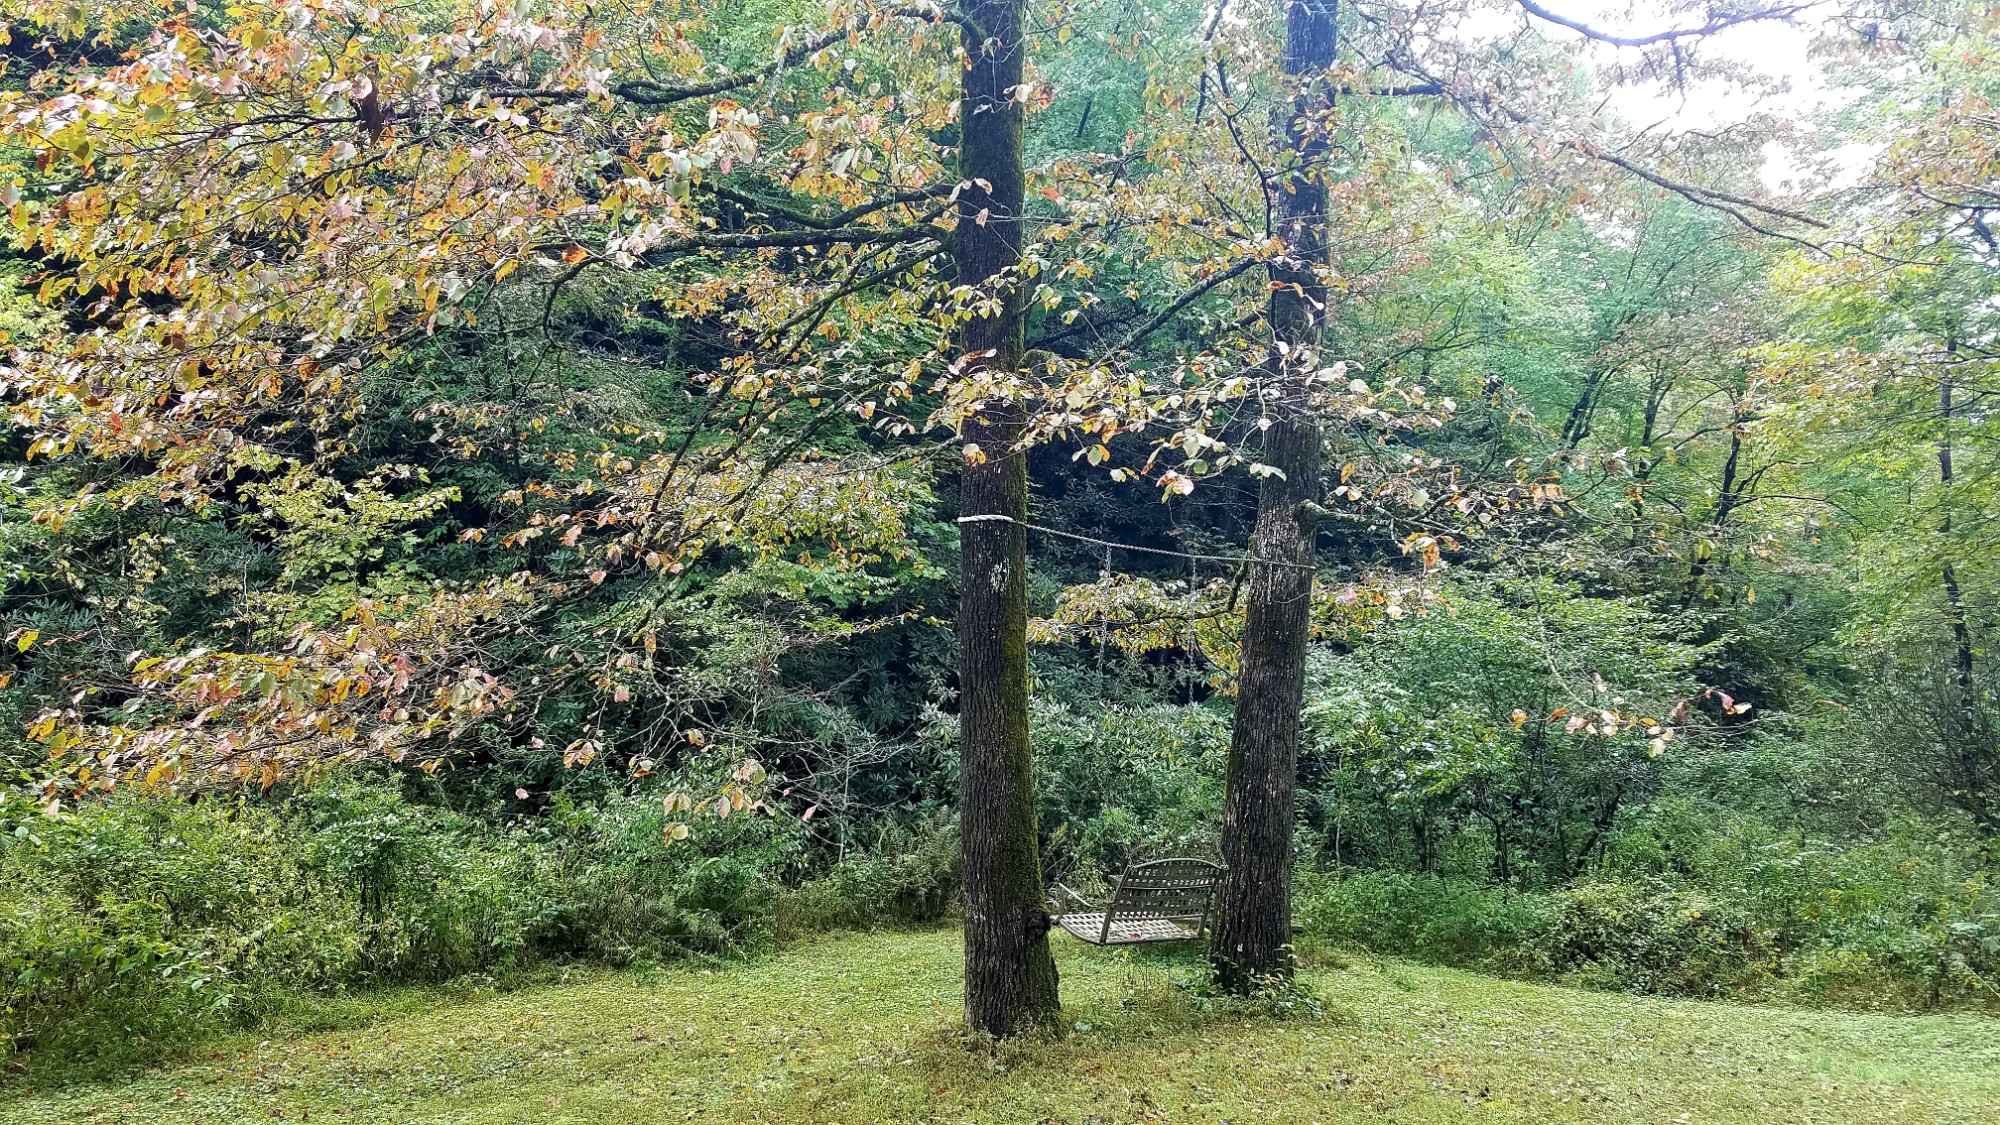 Two large trees with fall color on a lawn with a two-person swing between them, facing a wooded area